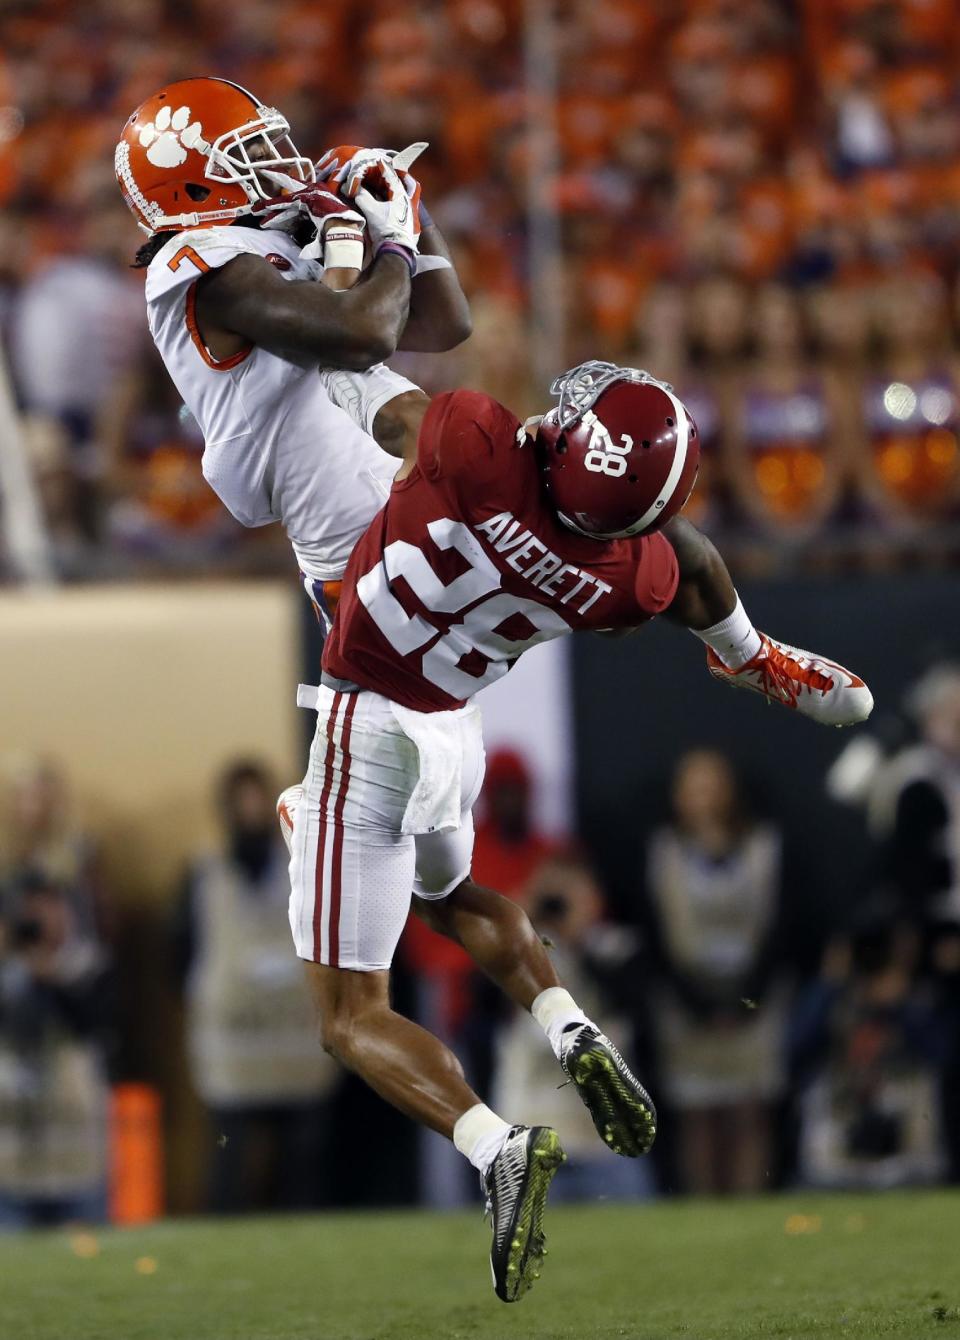 Clemson's Mike Williams catch over Alabama's Anthony Averett during the second half of the NCAA college football playoff championship game Tuesday, Jan. 10, 2017, in Tampa, Fla. (AP Photo/John Bazemore)